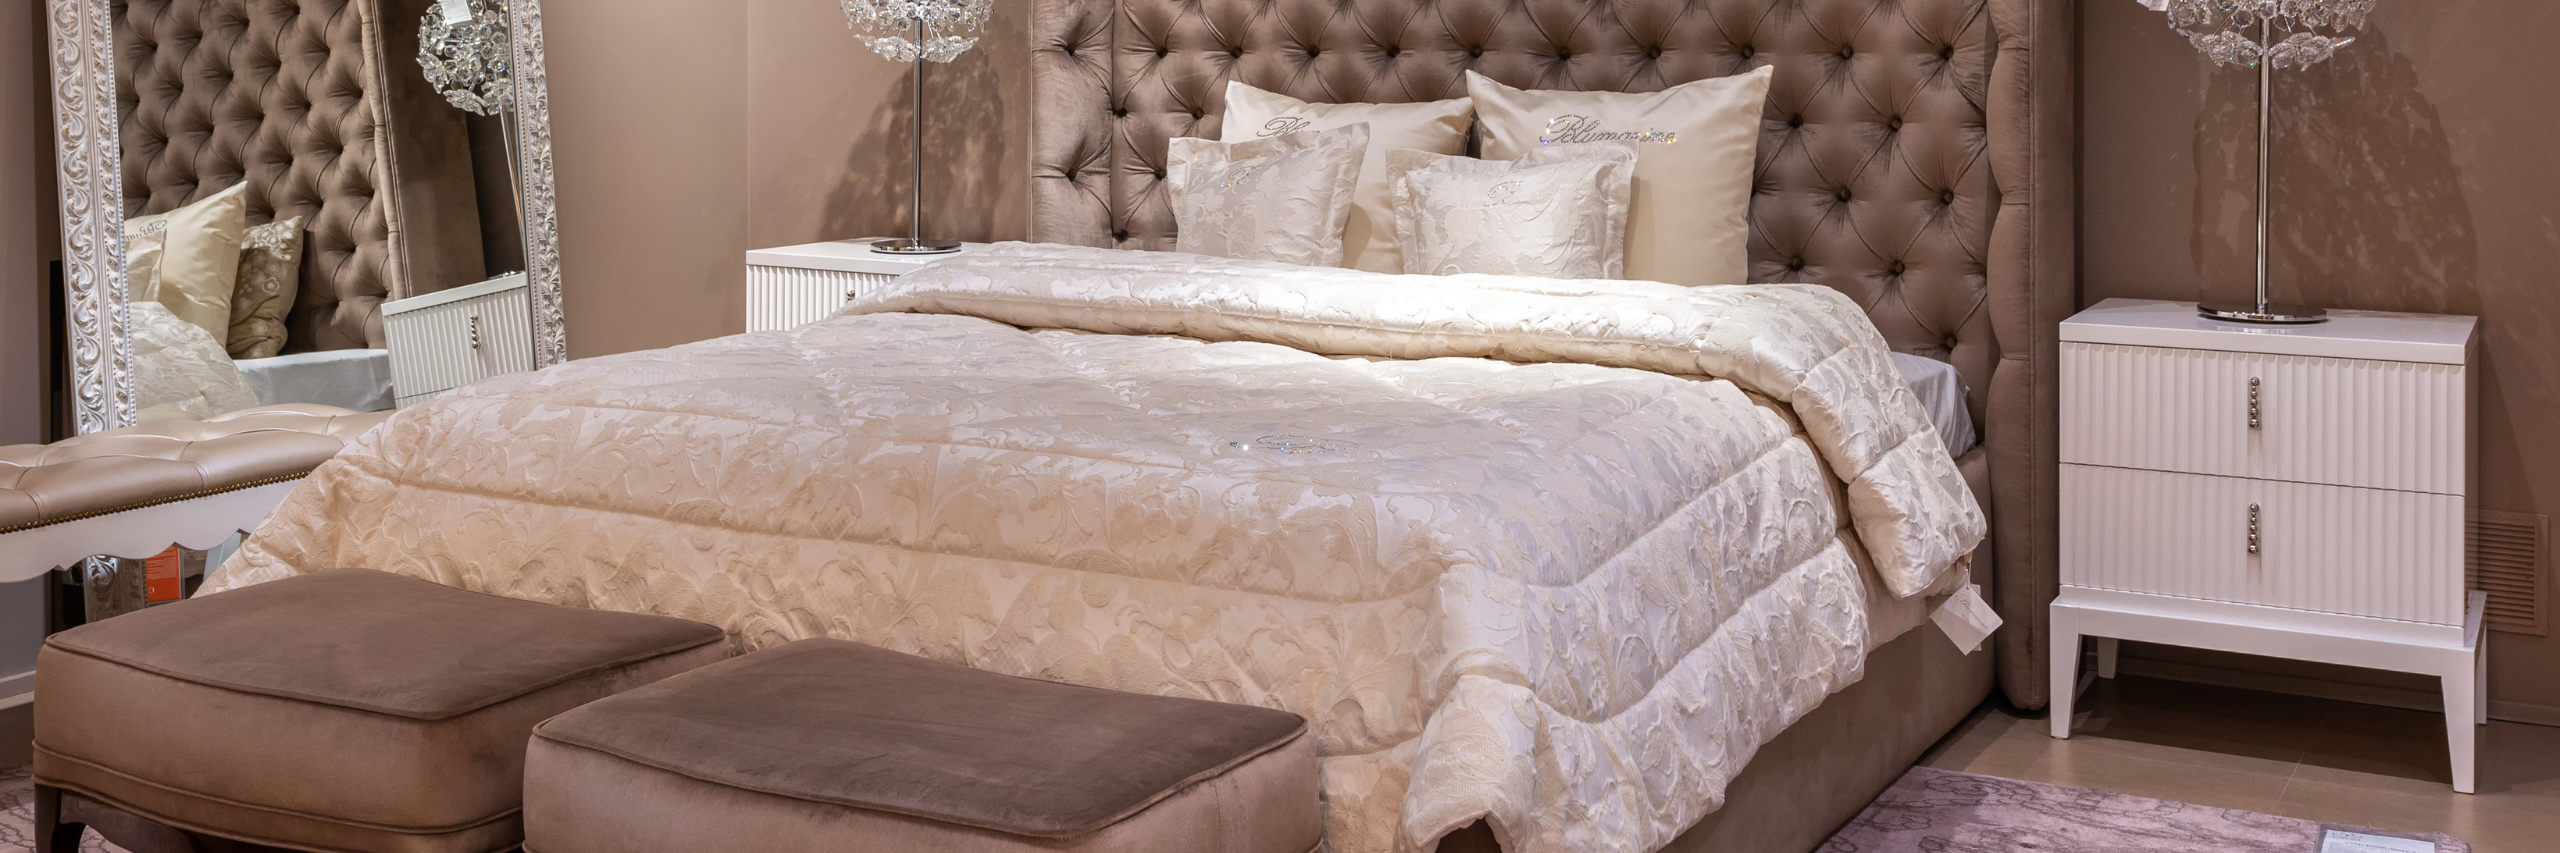 Bedding Products